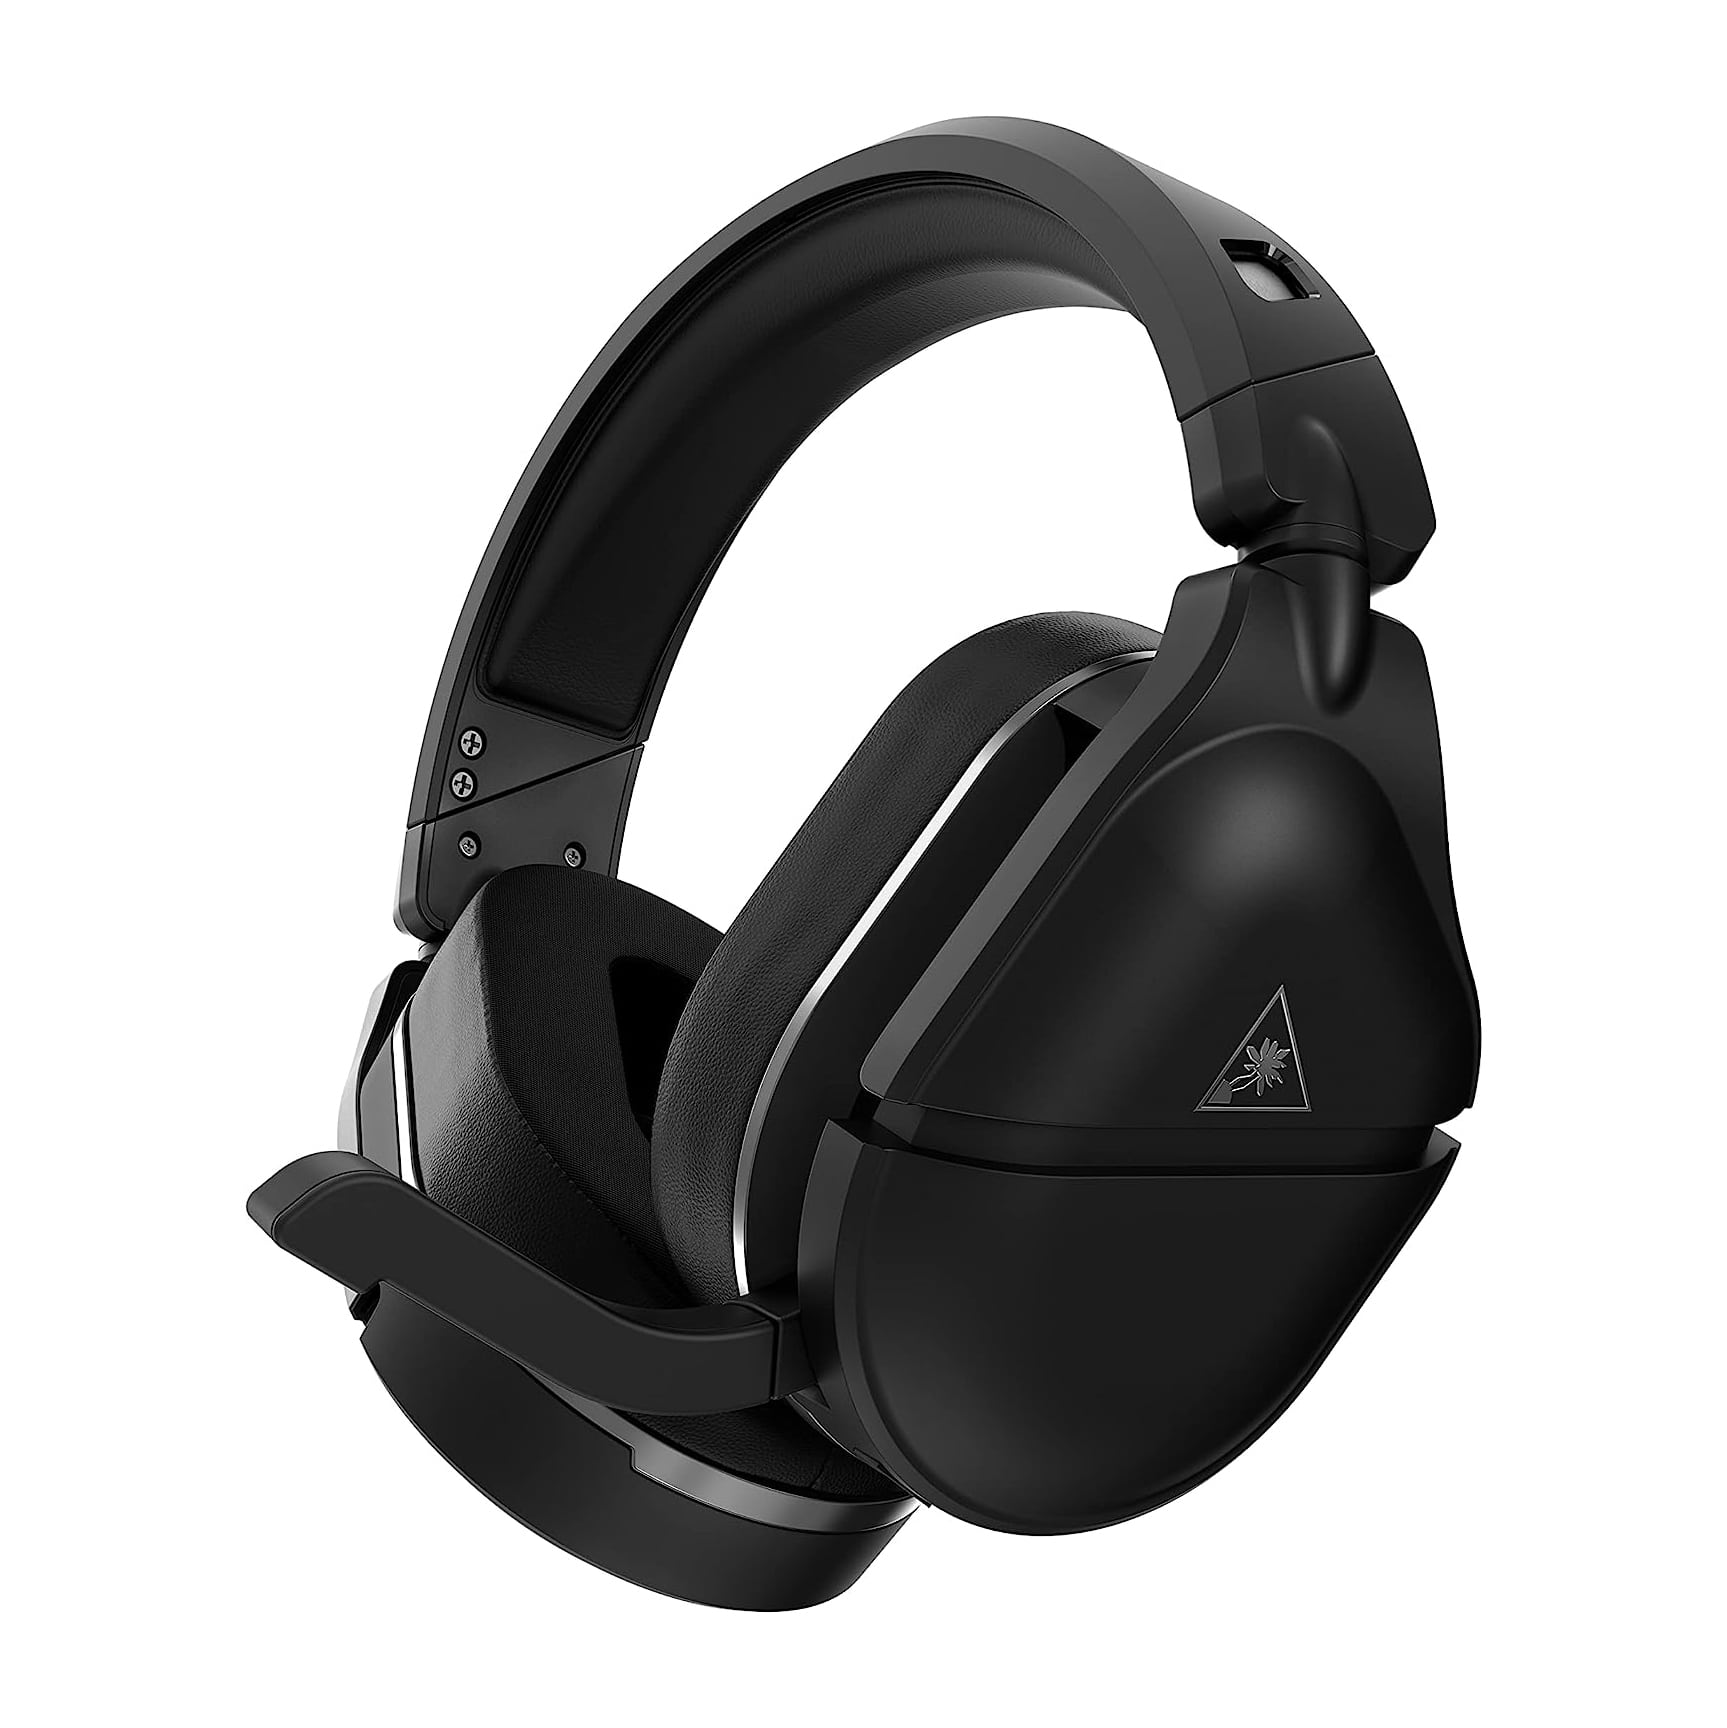 Turtle Beach Stealth 700 Gen 2 Wireless Gaming Headset with Bluetooth – Black Audio  |  Gaming Headsets  |  Wireless Headsets  |